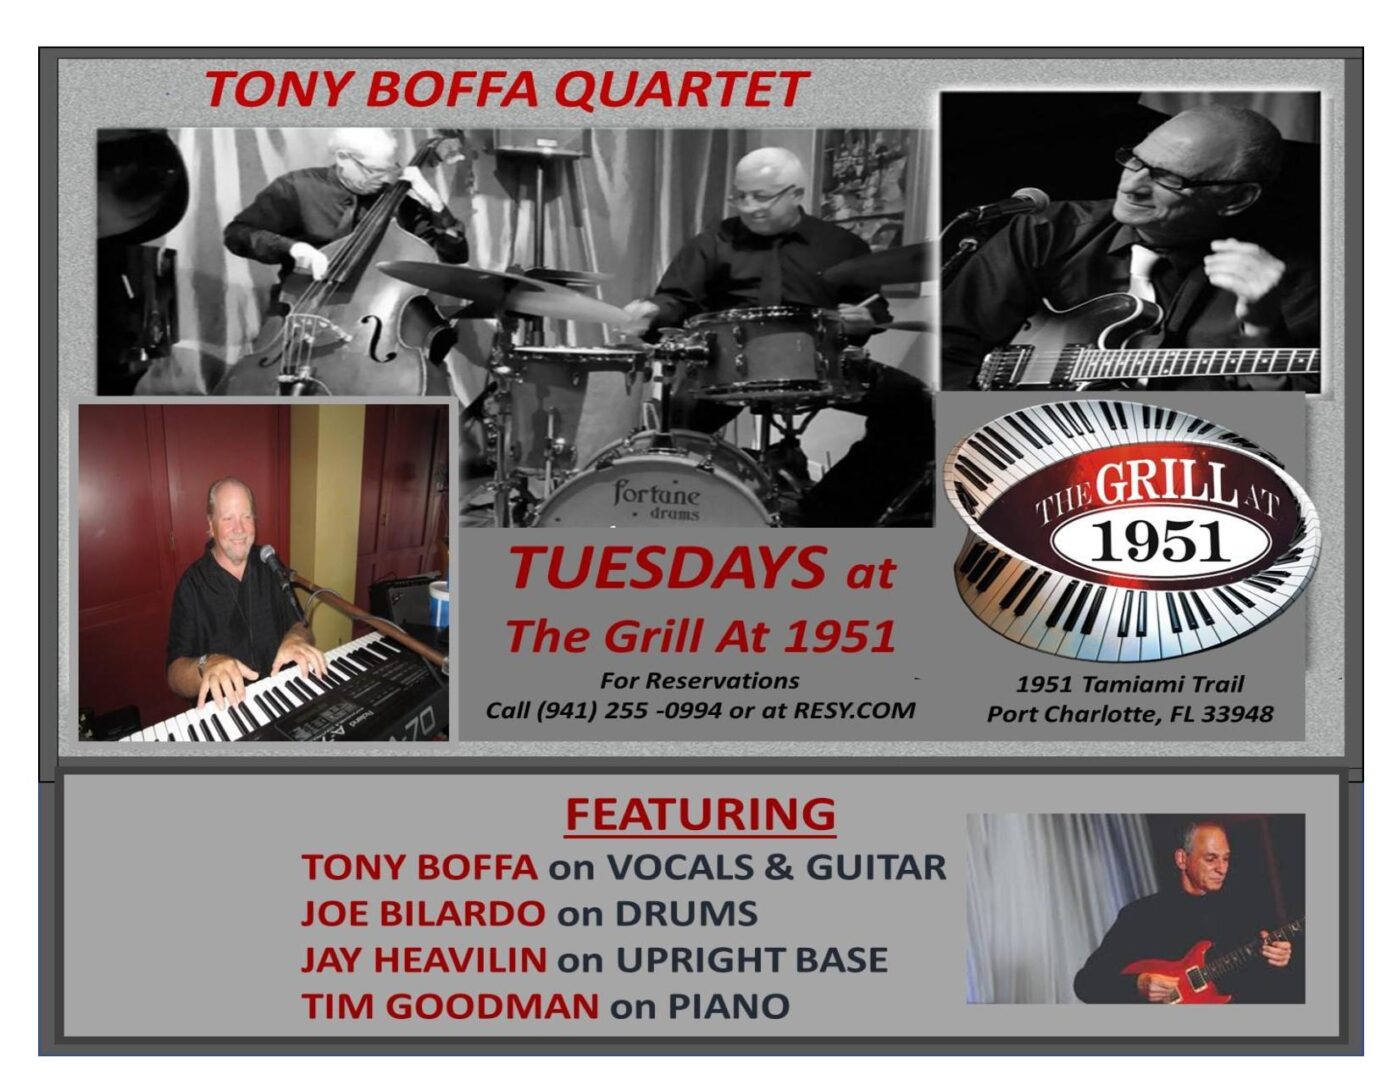 Promotional poster for the Tony Boffa Quartet’s live music show at The Grill At 1951